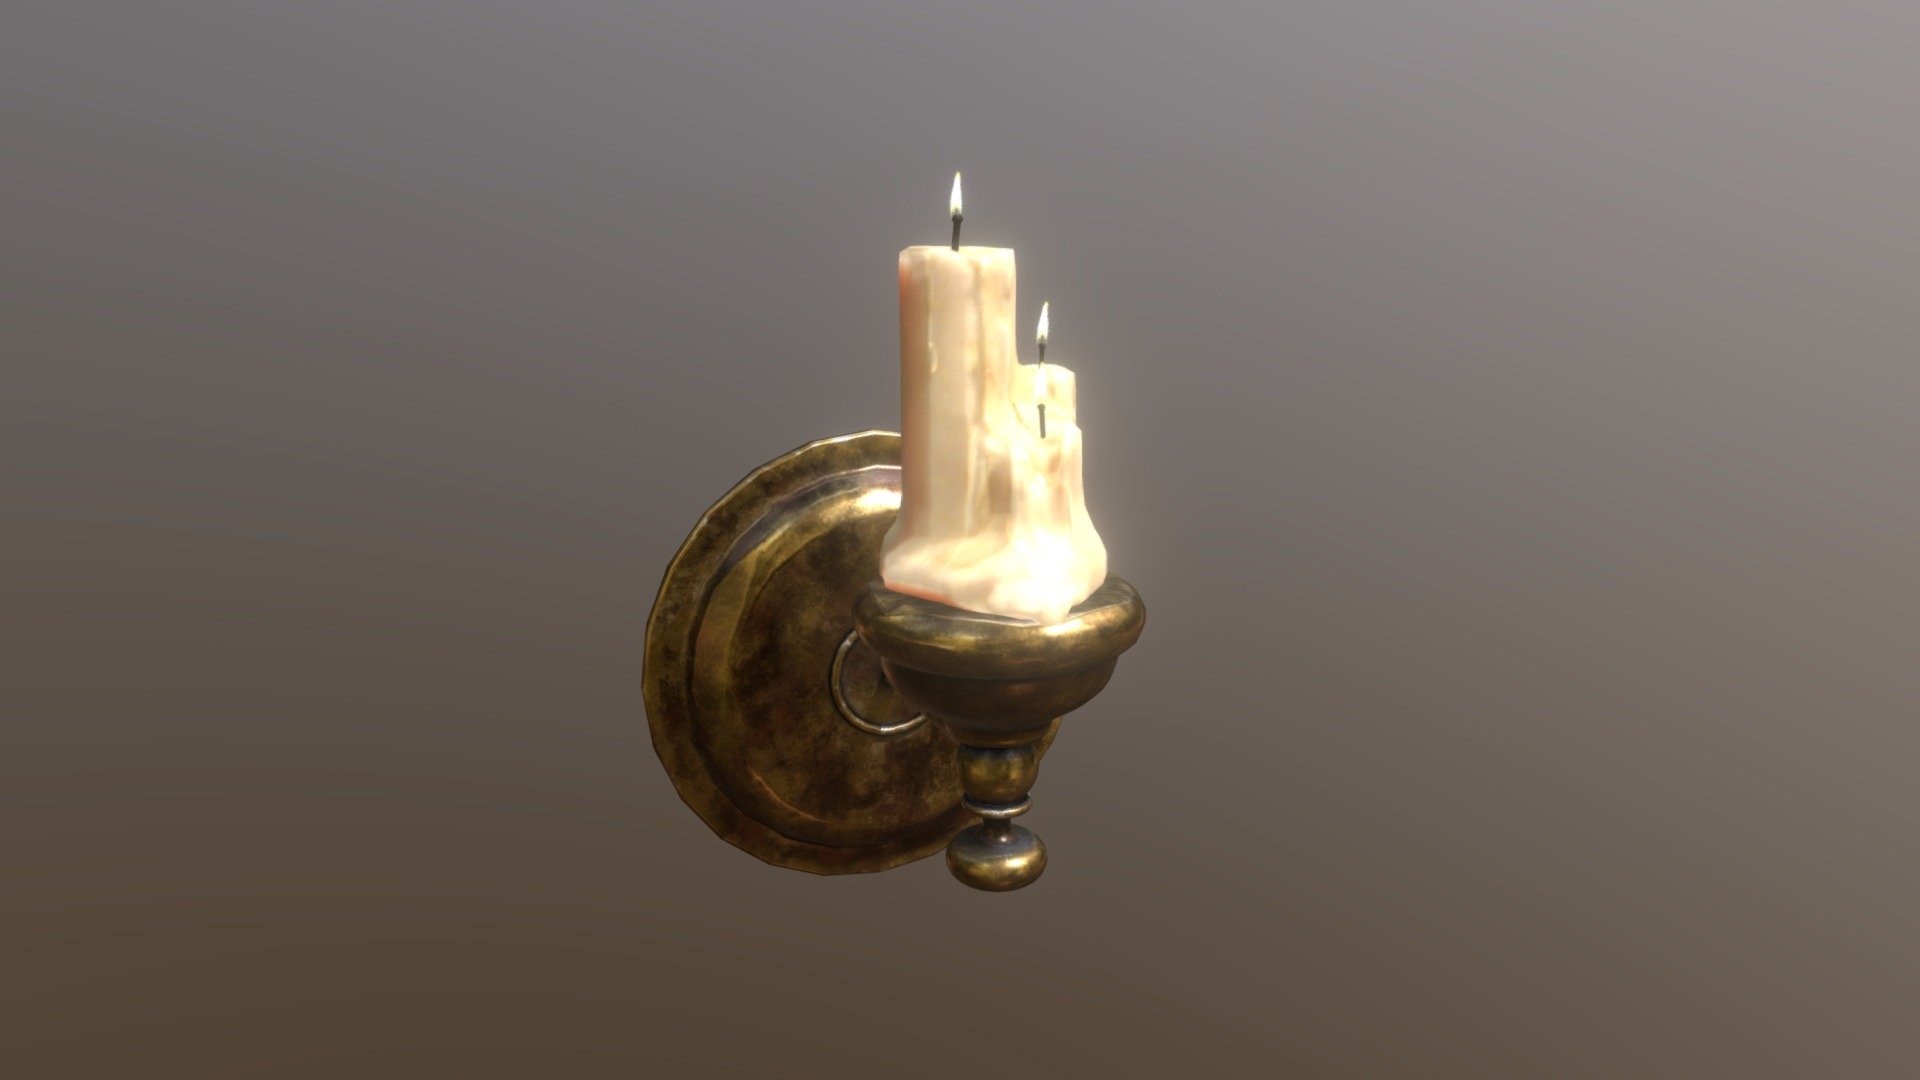 Brass Wall Candle Holder 3D Model. This model contains the Brass Wall Candle Holder itself 

All modeled in Maya, textured with Substance Painter.

The model was built to scale and is UV unwrapped properly. 

Contains TWO (2) Texture Sets: One for the candle and one for the Candle Holder  

⦁   5469 tris. 

⦁   Contains: .FBX .OBJ and .DAE

⦁   Model has clean topology. No Ngons.

⦁   Built to scale

⦁   Unwrapped UV Map

⦁   4K Texture set

⦁   High quality details

⦁   Based on real life references

⦁   Renders done in Marmoset Toolbag

Polycount: 

Verts 2844

Edges 5627

Faces 2799

Tris 5469

If you have any questions please feel free to ask me 3d model